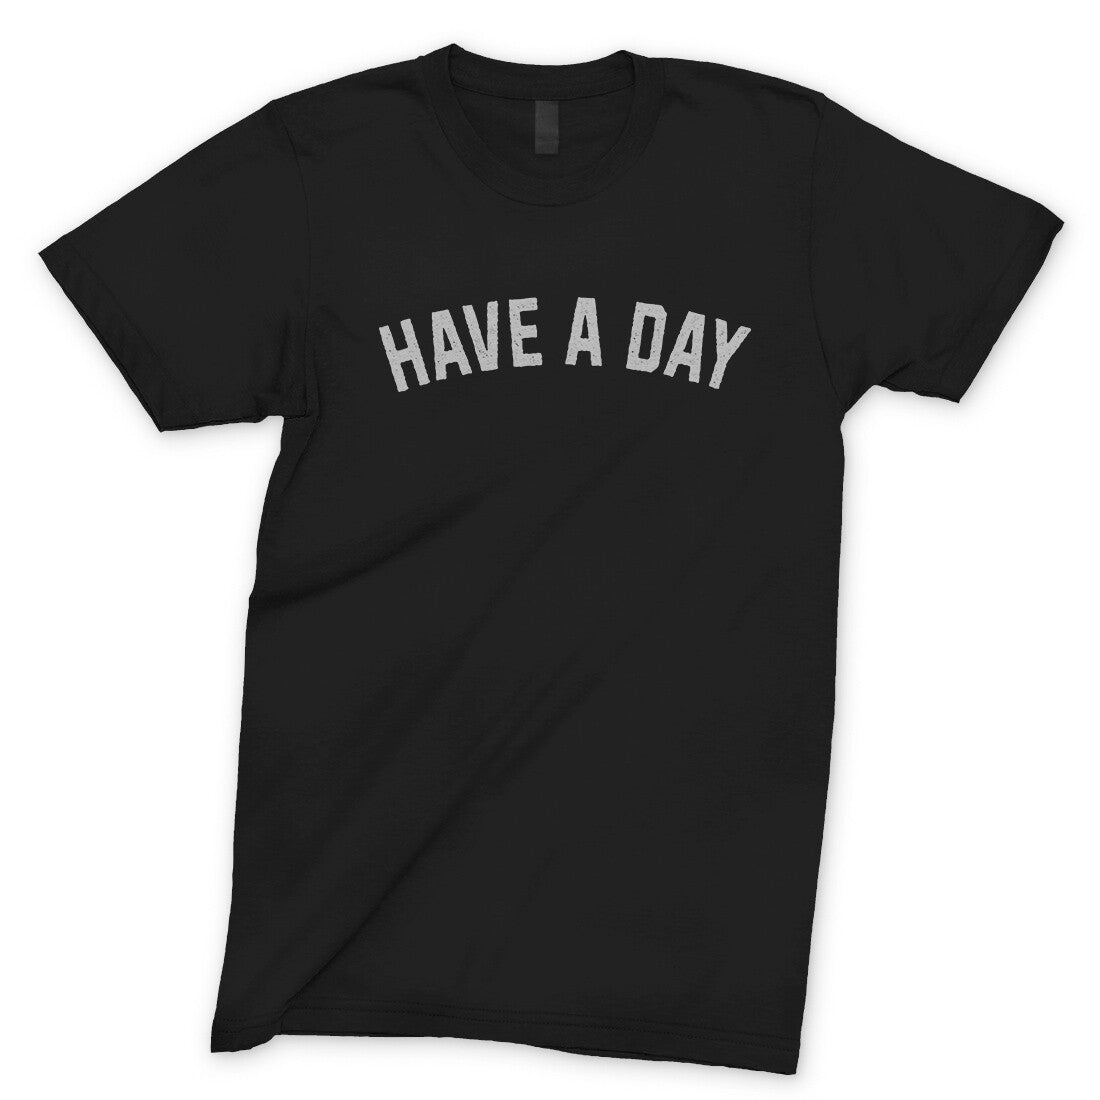 Have a Day in Black Color